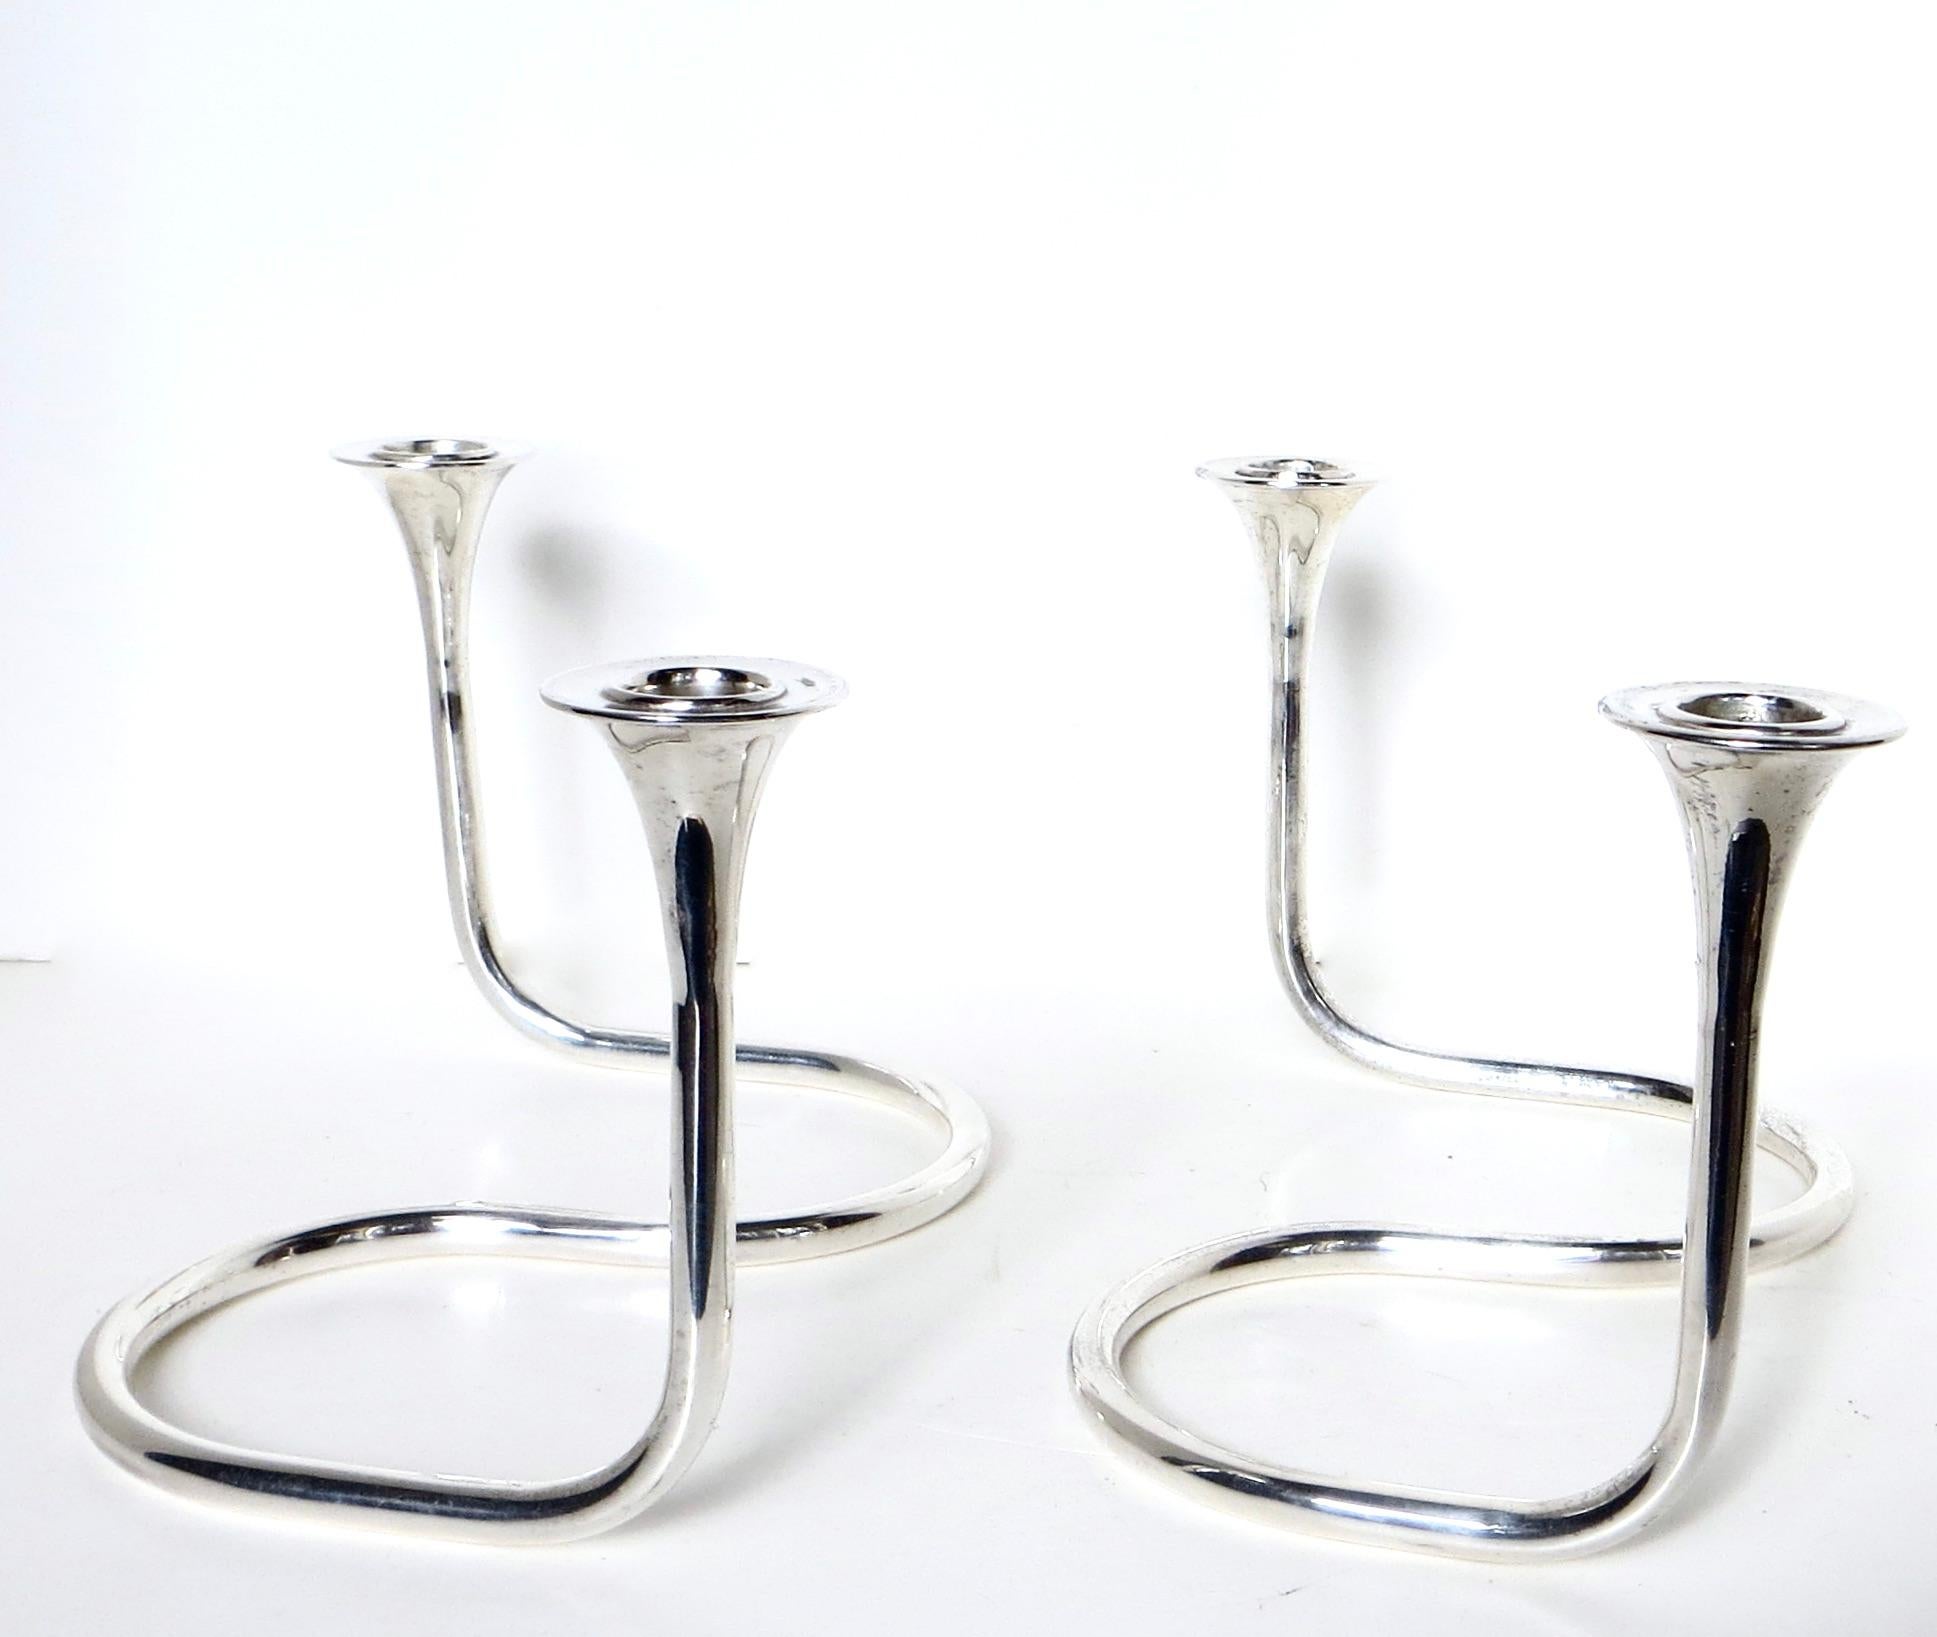 Offered is a unique pair of sterling silver serpentine Mid-Century Modernist candleholders. They are of fine quality holloware tubular design, weighing 173 grams each (6 oz.) for a total of 346 grams the pair. The contemporary 